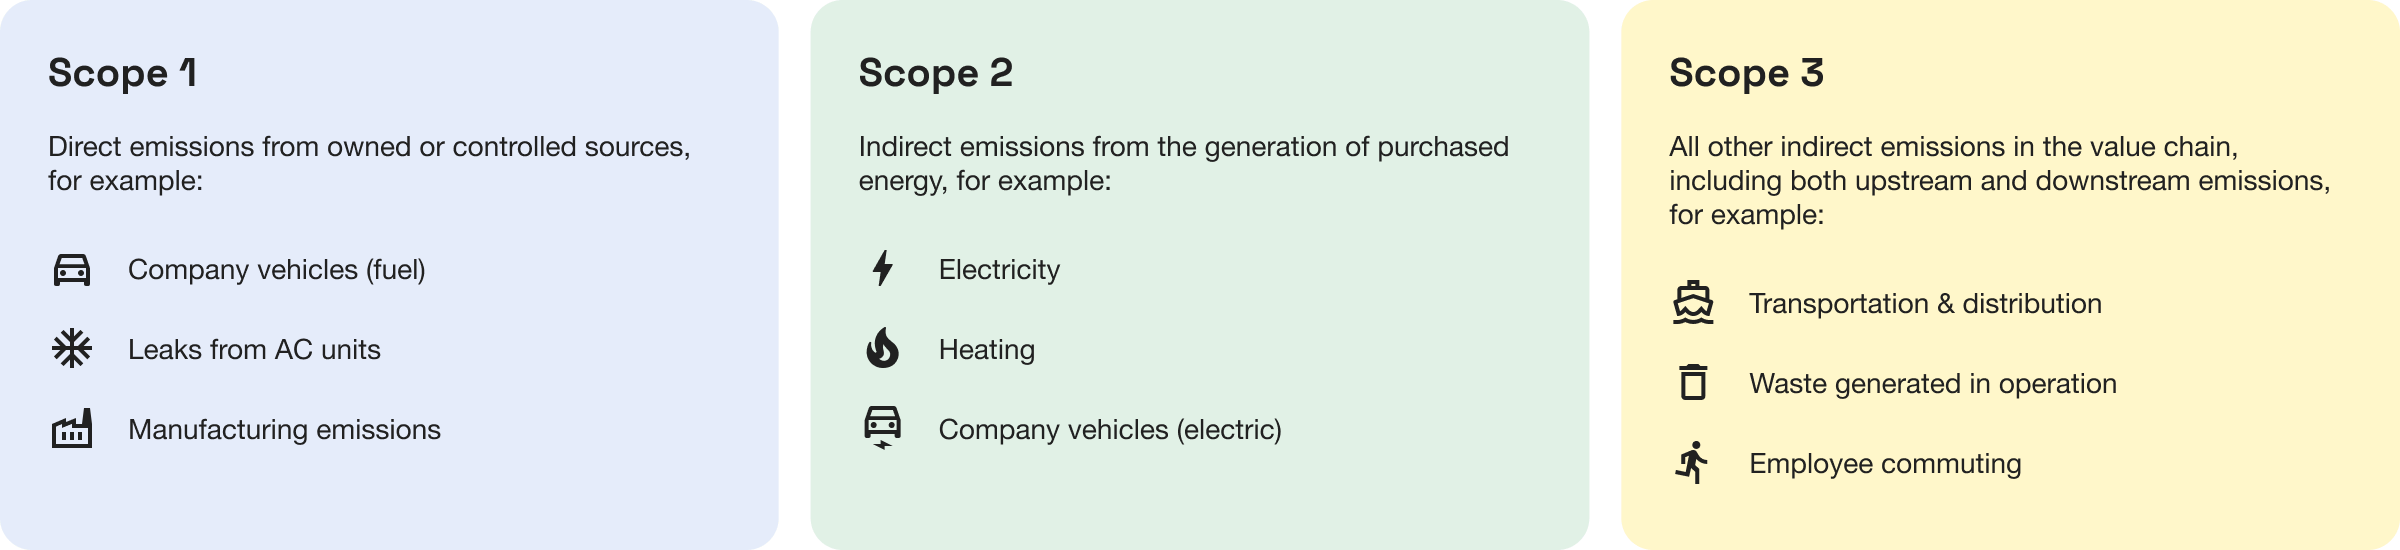 Scope 1, 2, and 3 emissions explained | What is carbon intensity and why does it matter in supply chains? | Lune climate